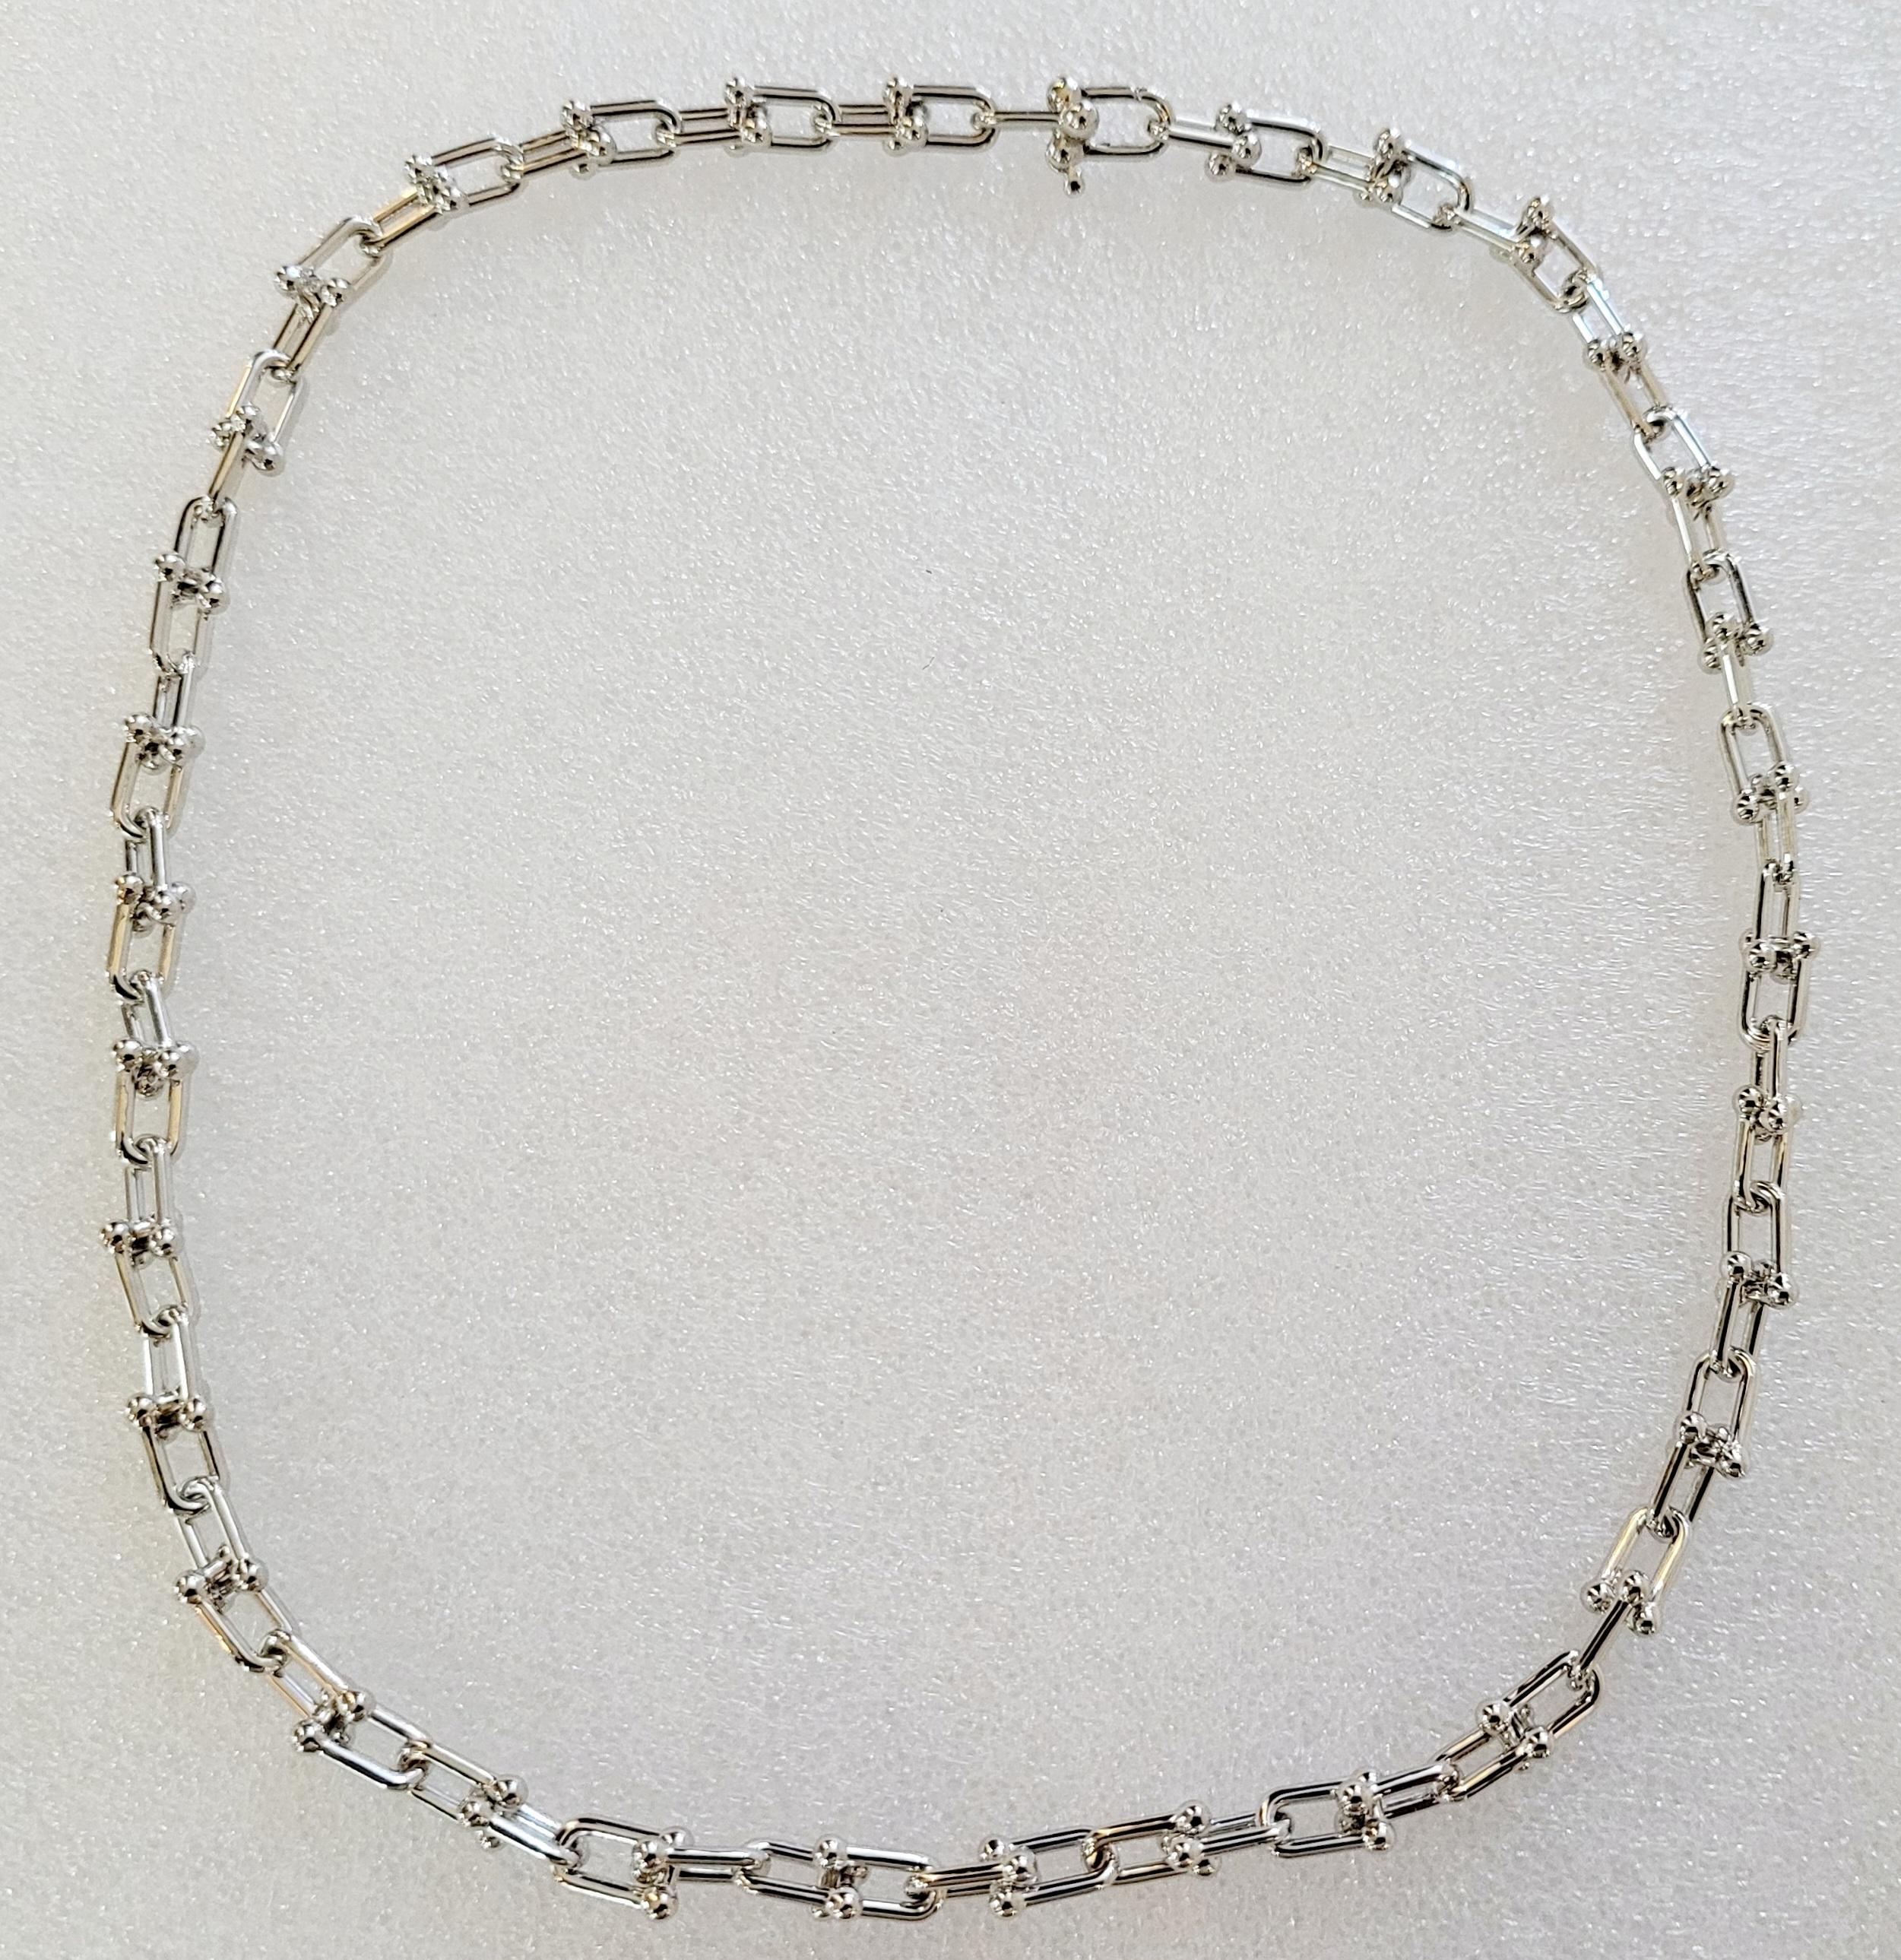 Tiffany & Co: Link Necklace
Link Size: Small
Material: Sterling Silver
Metal Purity: 925
Necklace Length: 18''
Necklace Weight: 39gr
Gender: Unisex
Condition: New, never worn
Retail Price: $ 2.100